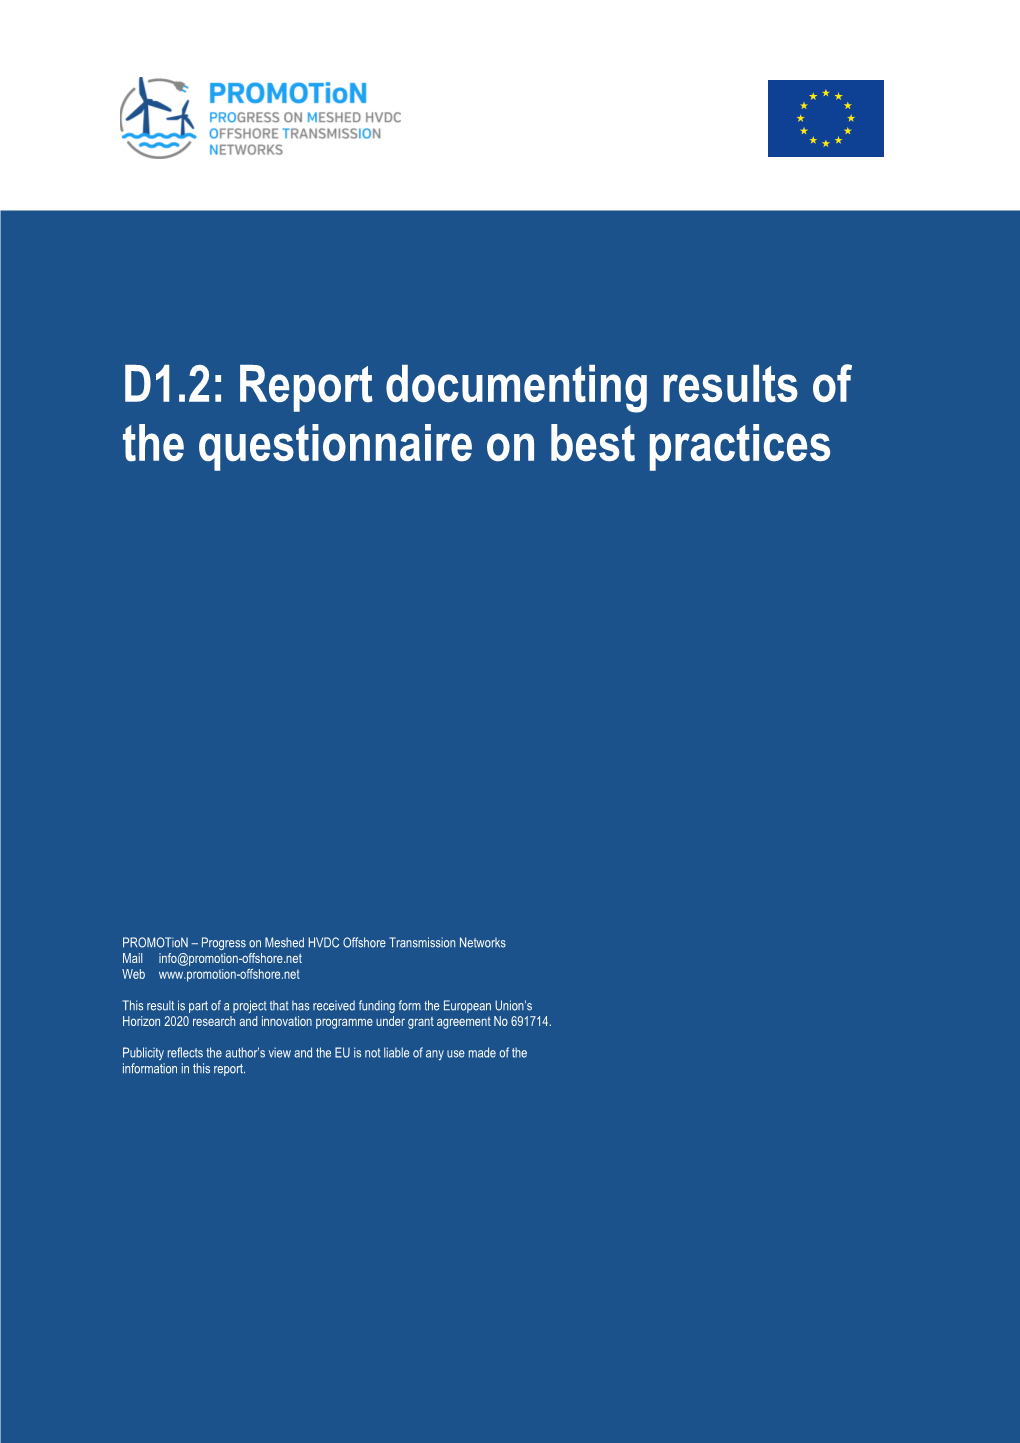 D1.2: Report Documenting Results of the Questionnaire on Best Practices